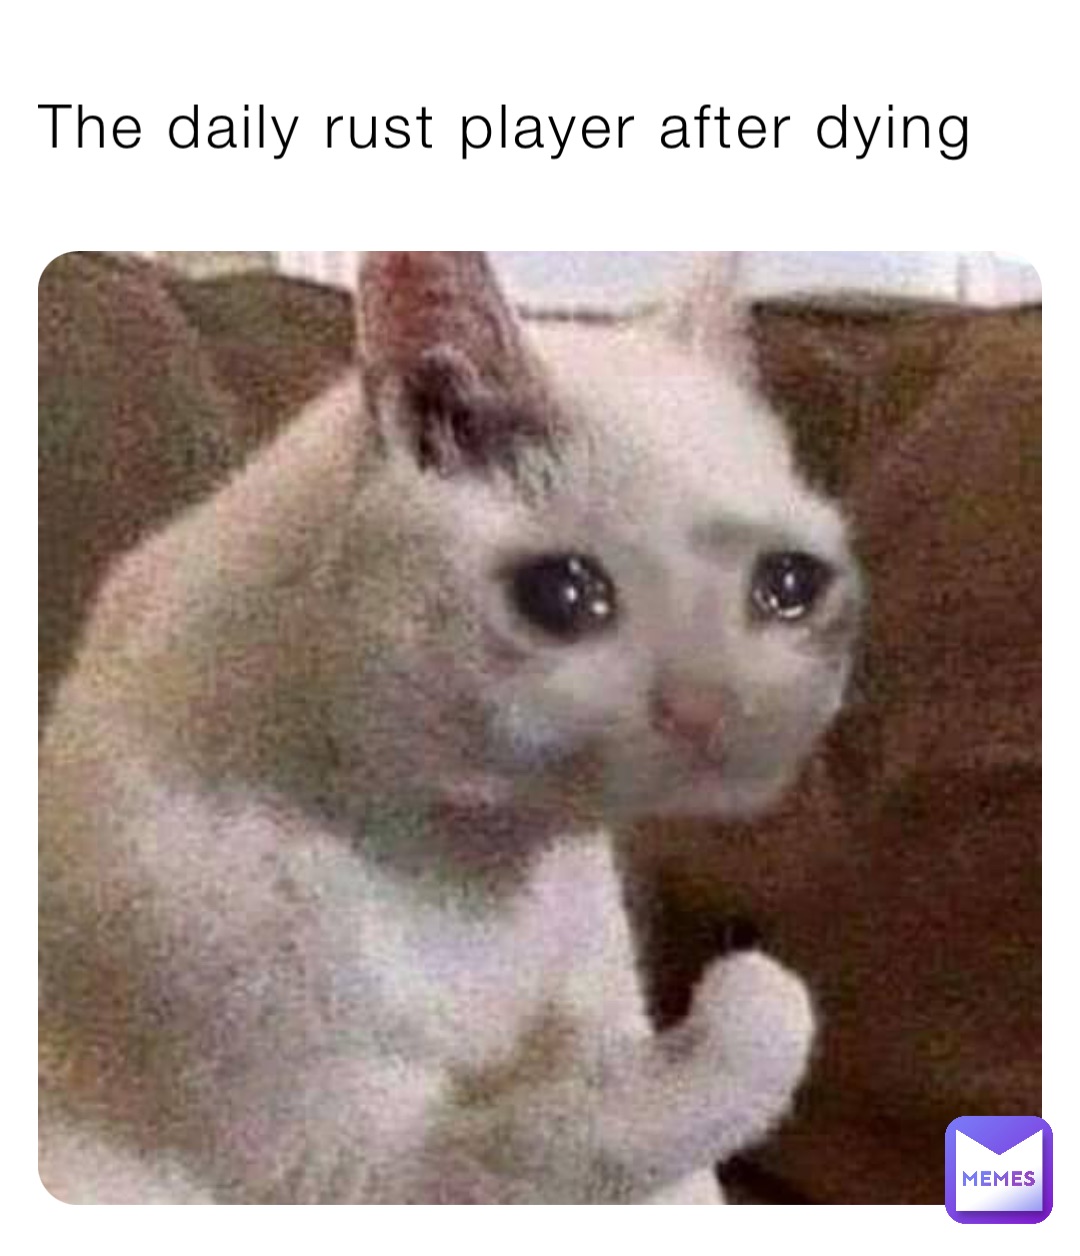 The daily rust player after dying